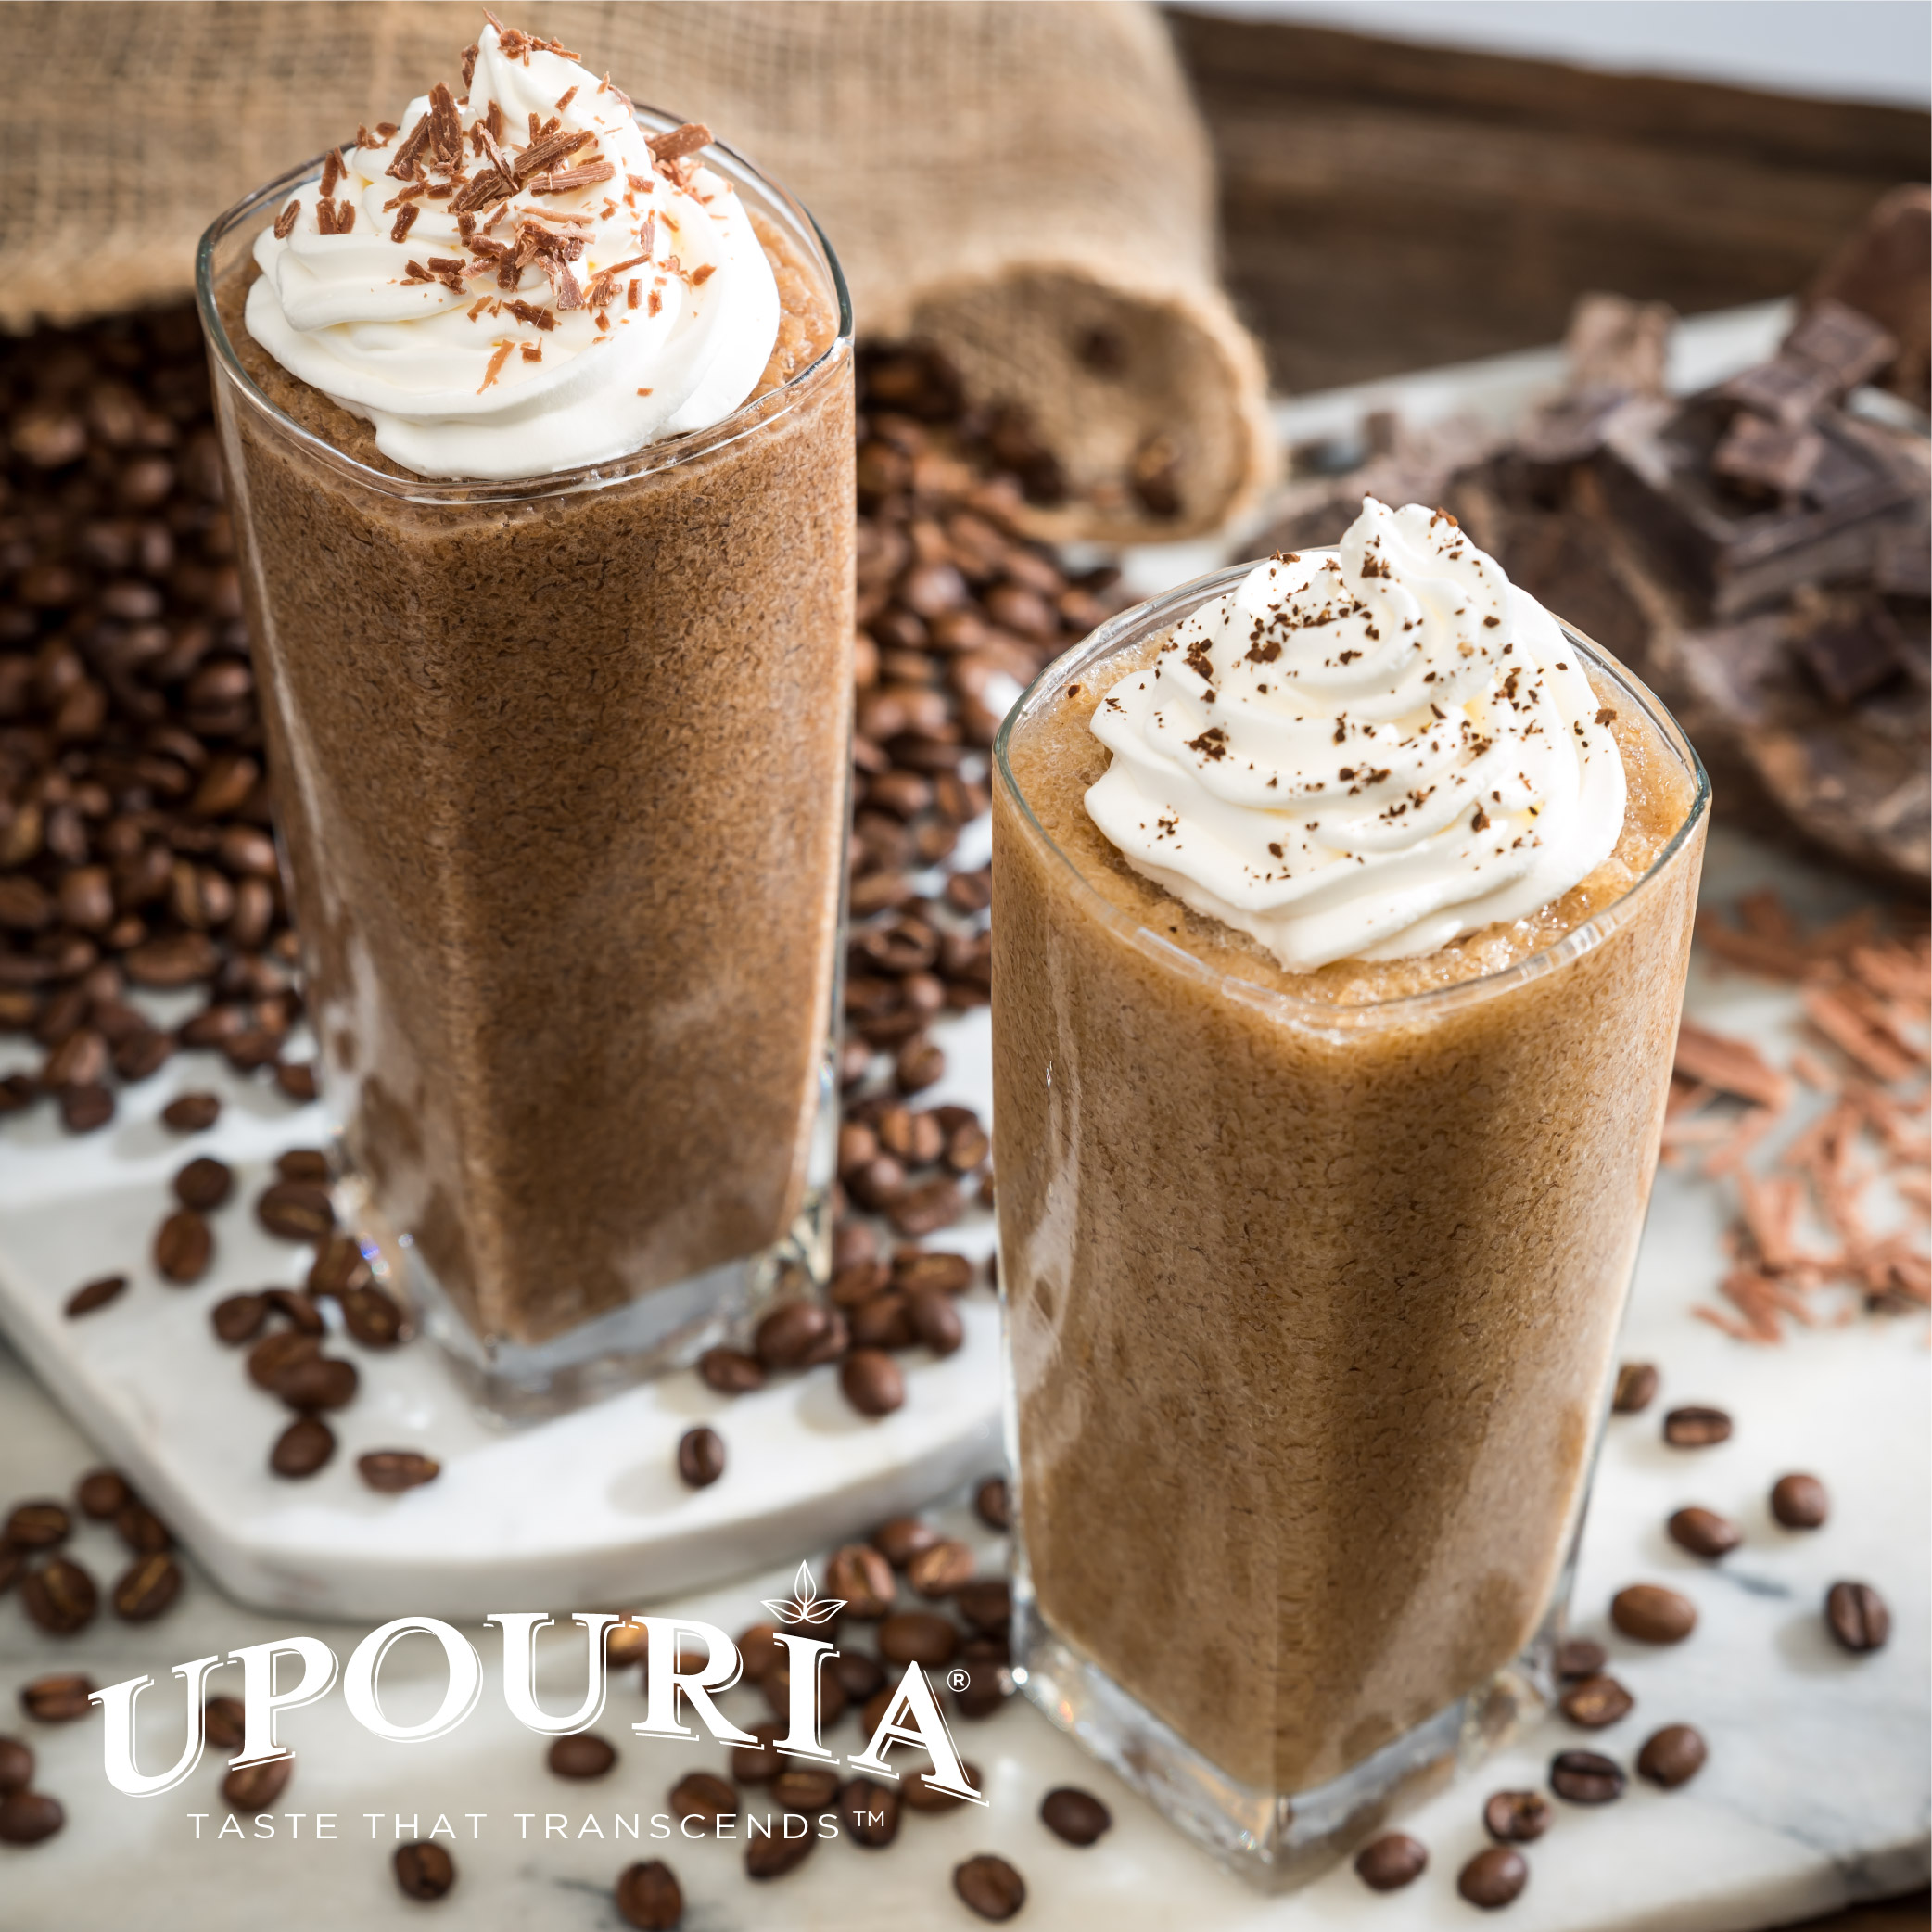 https://sunnyskyproducts.com/wp-content/uploads/Upouria-Frozen-Coffee-Product-Image-500x500-01.jpg